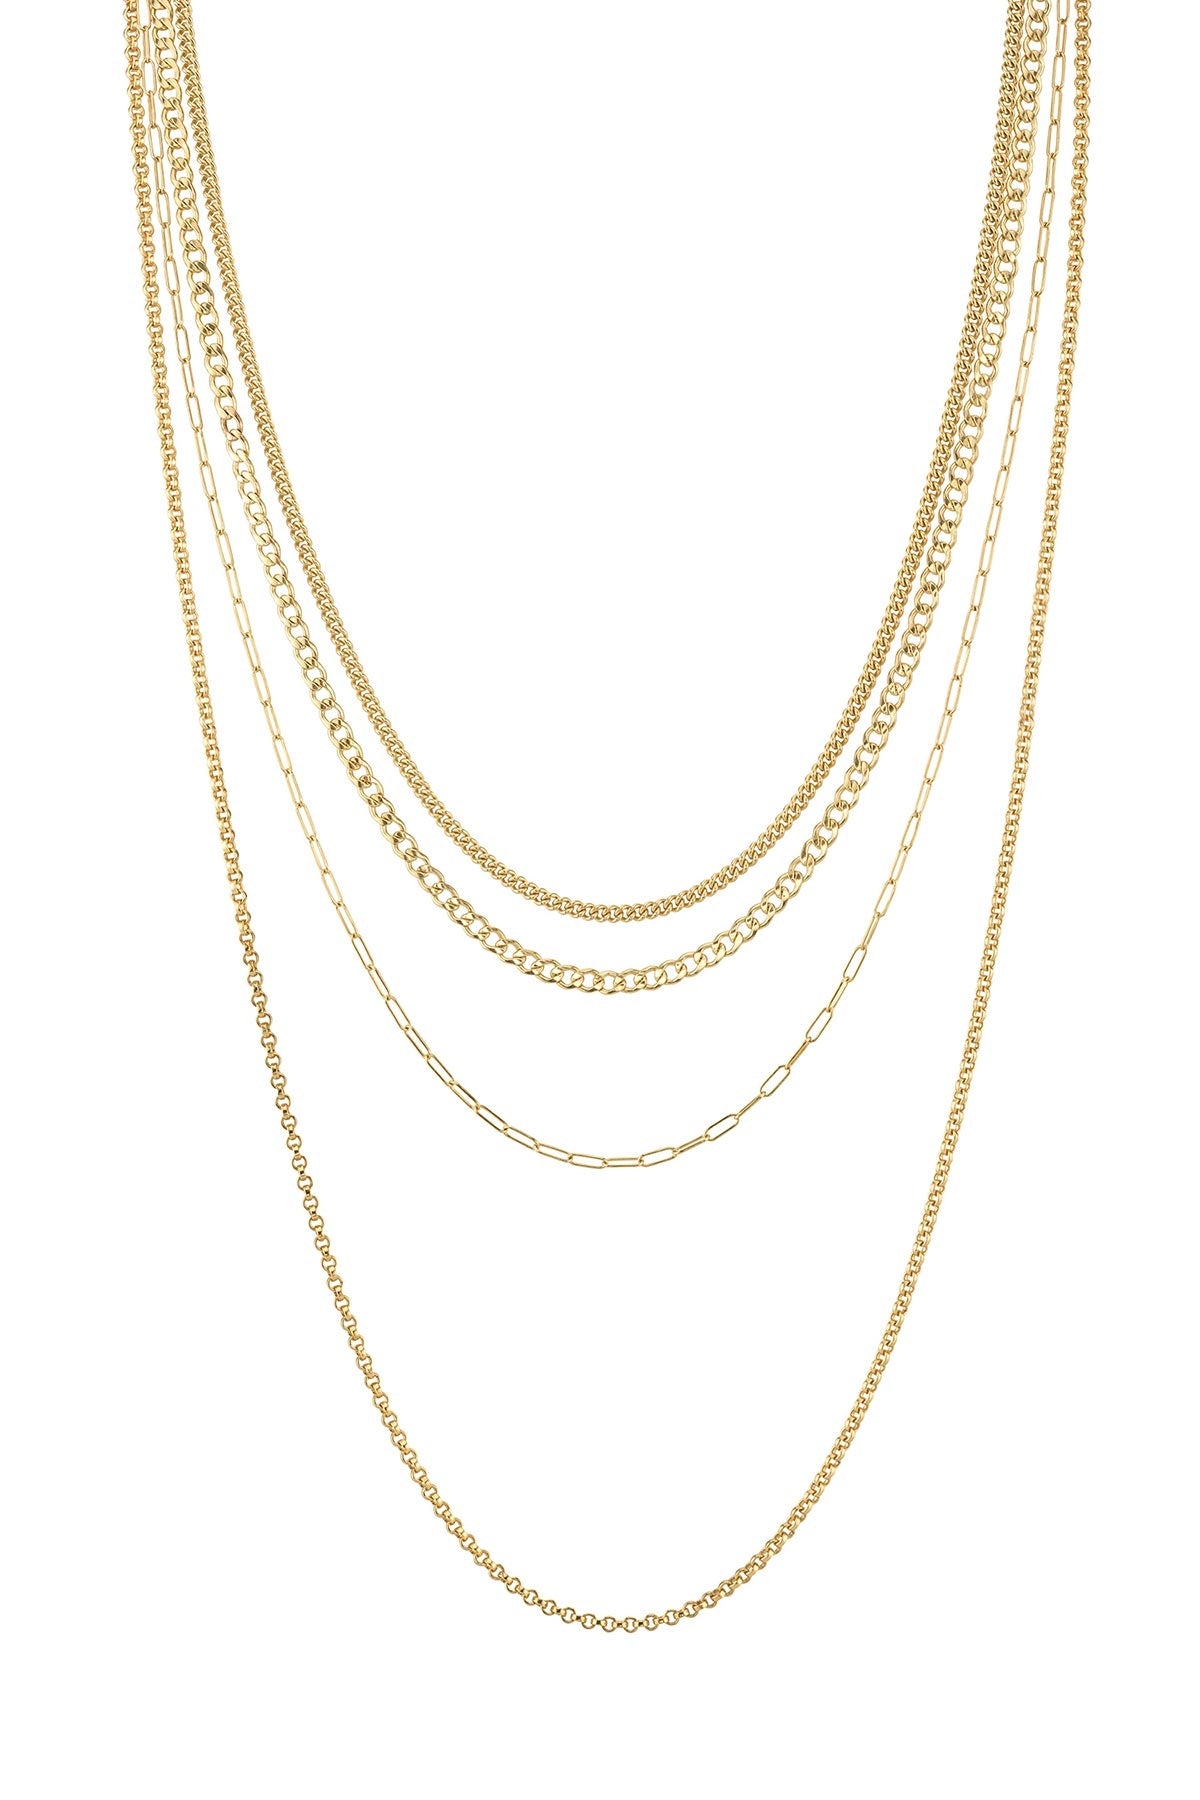   MULTI LAYER CHAIN IN GOLD BY SLOAN 